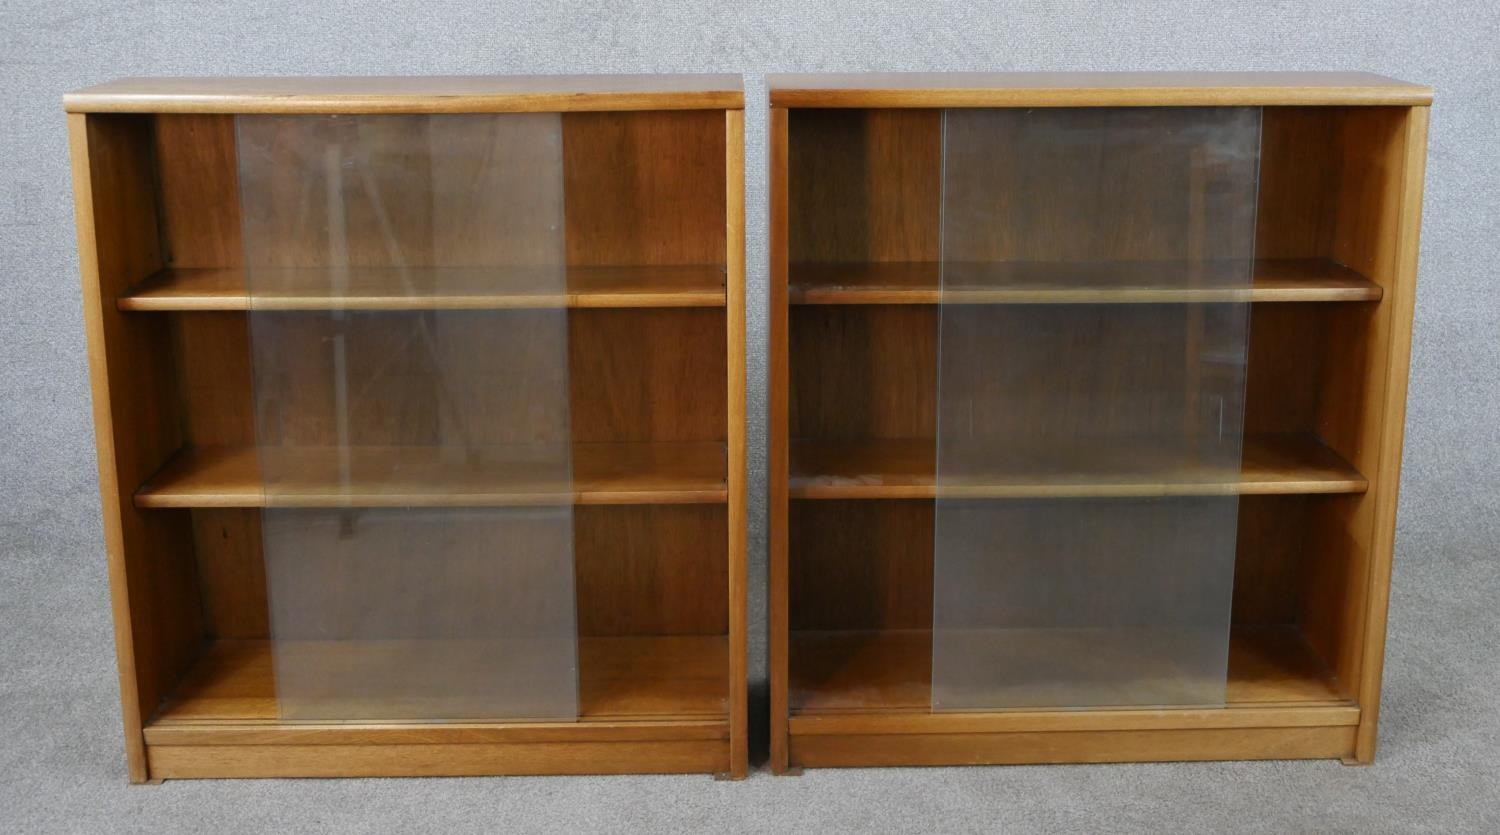 A pair of circa 1970s Jonell bookcases, with a pair of glass sliding doors enclosing shelves, on a - Image 2 of 8